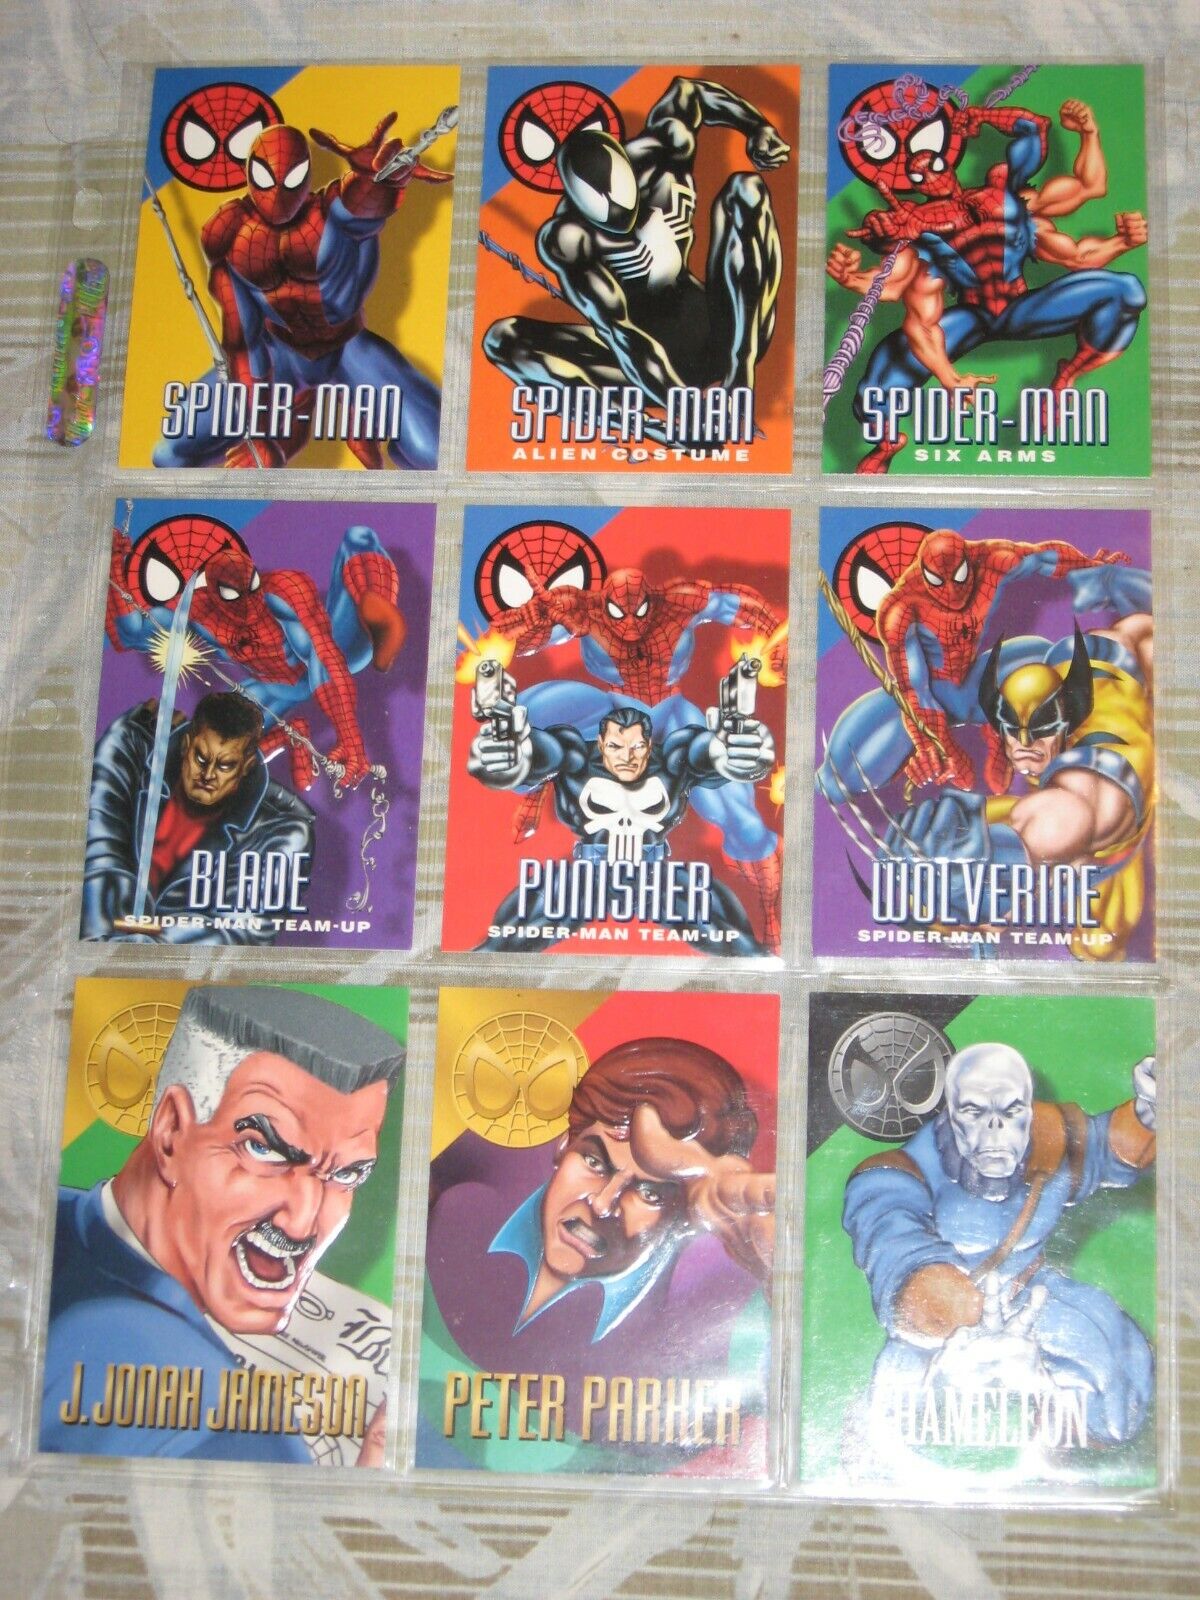 1996 MARVEL VISION BASE 100 CARD SET VENOM SPIDER-MAN WITH ALL 4 MINI-MAGS